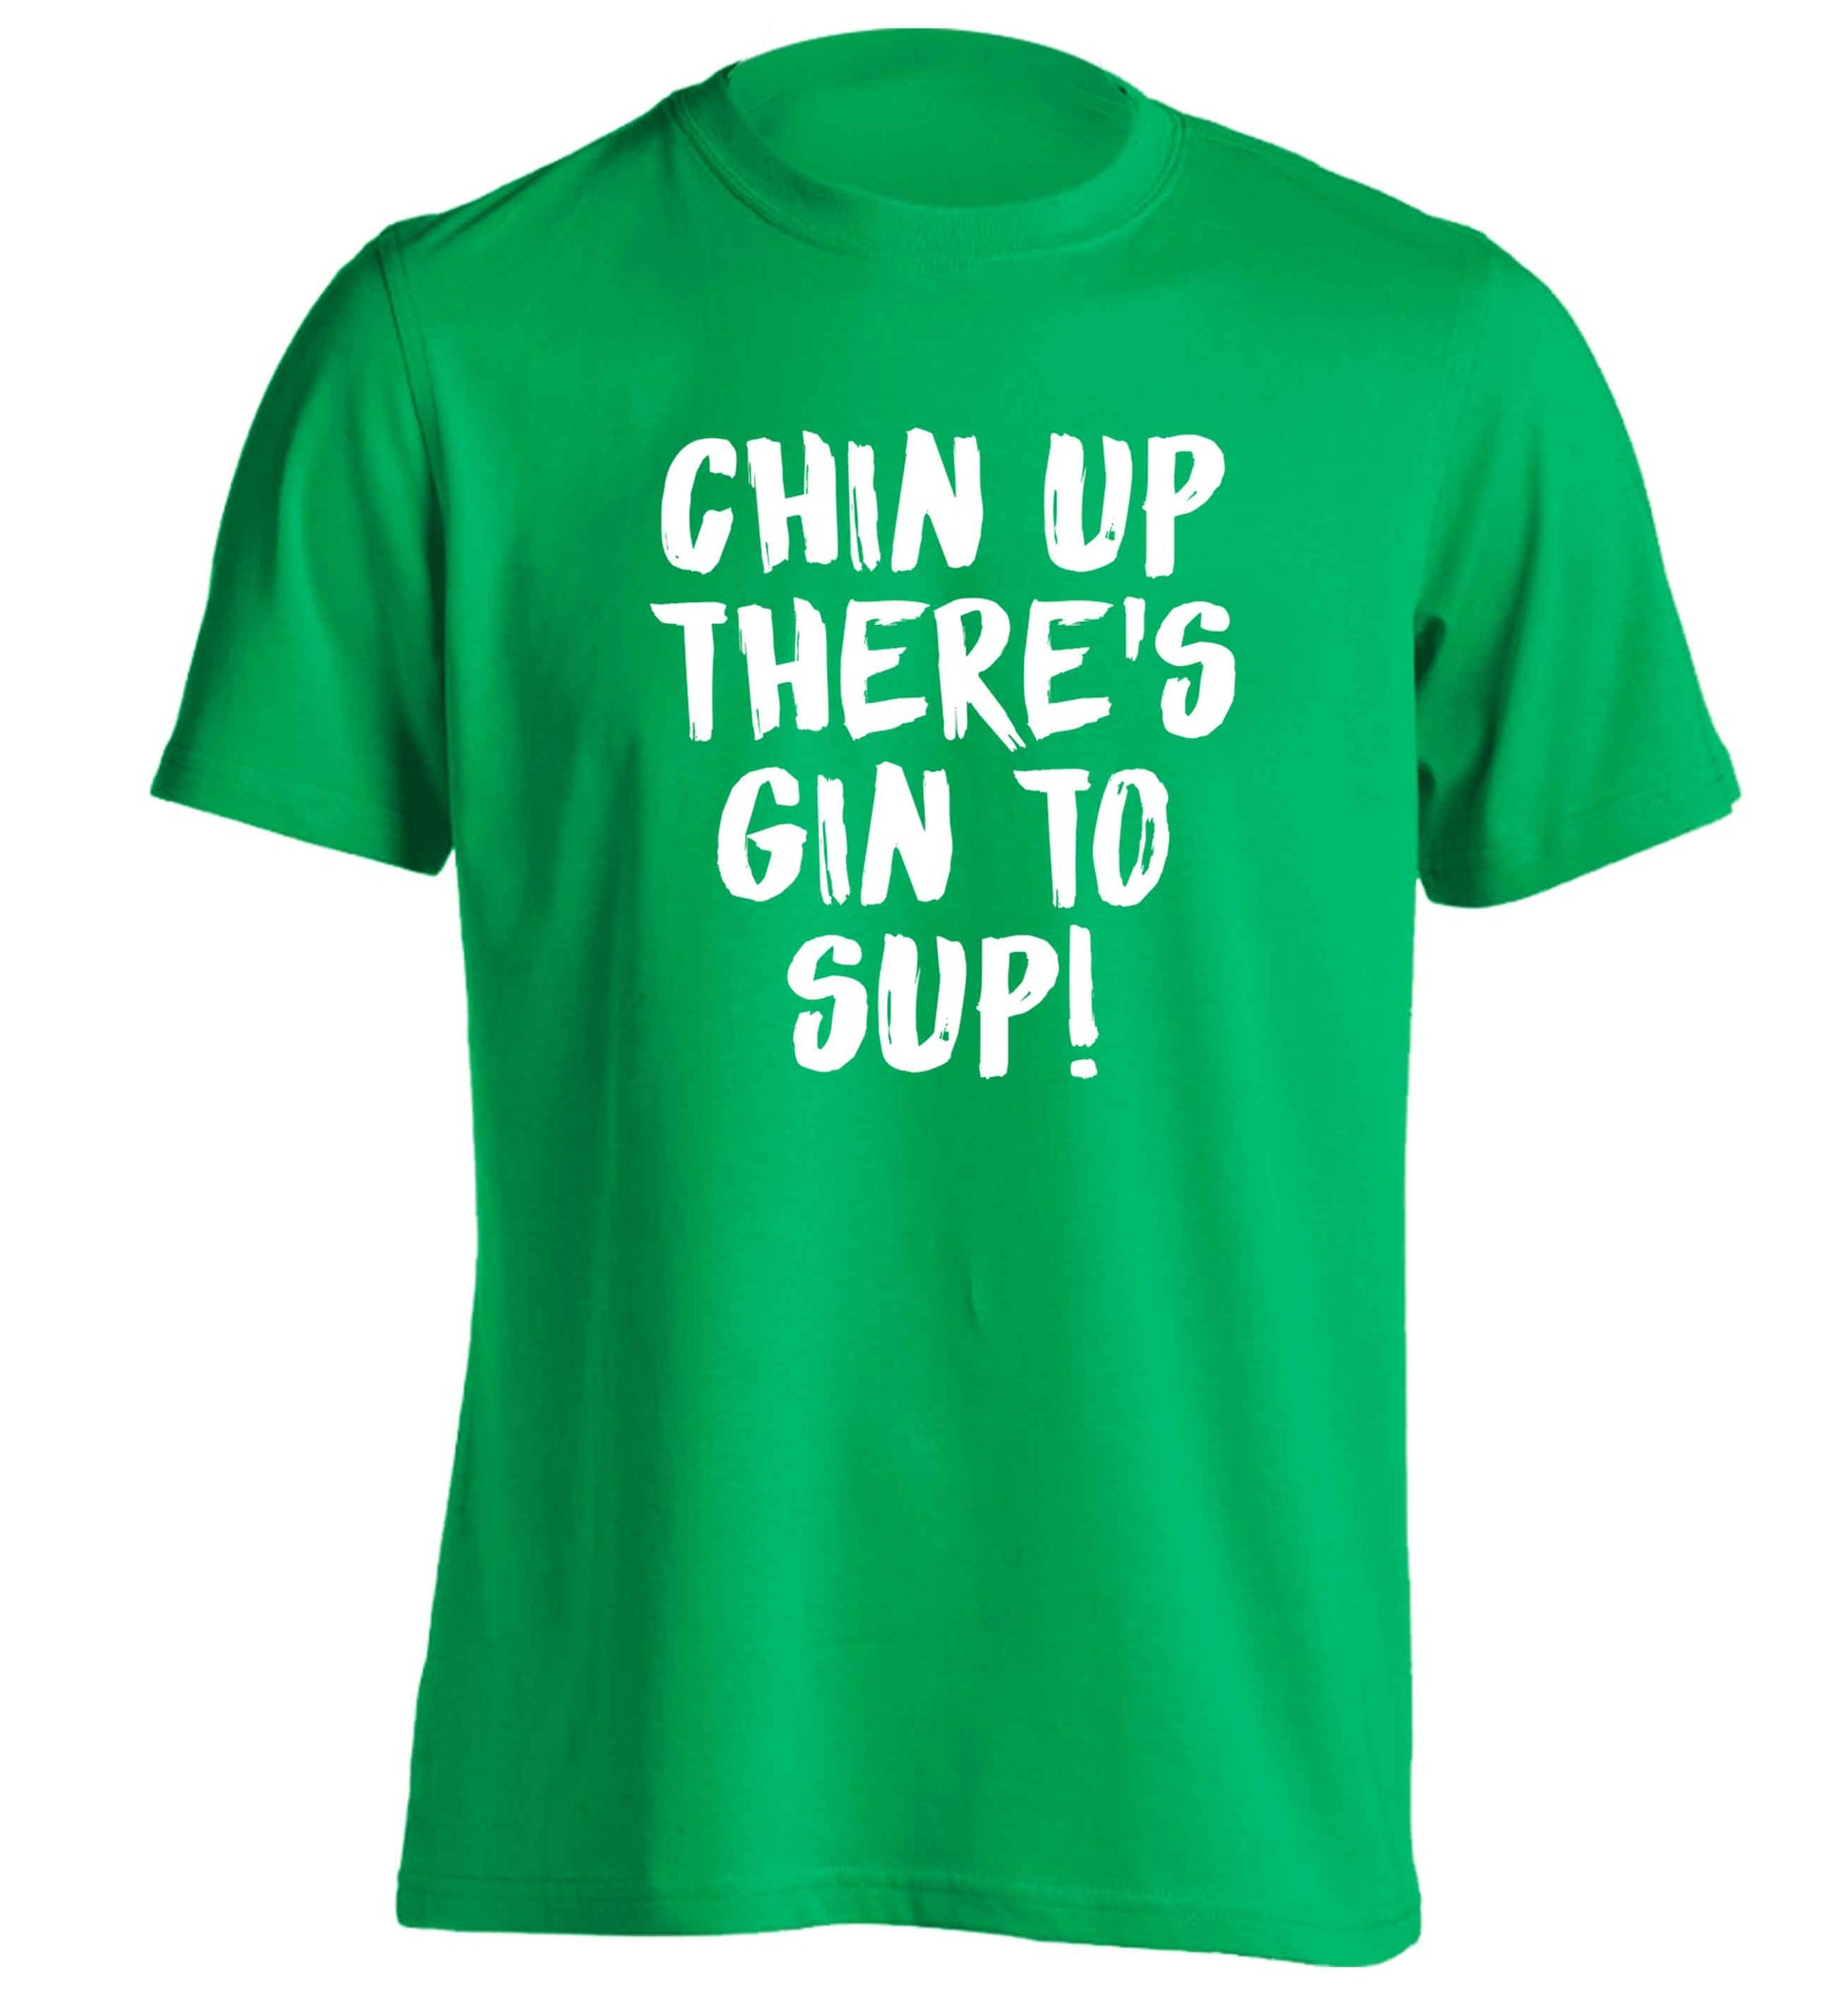 Chin up there's gin to sup adults unisex green Tshirt 2XL